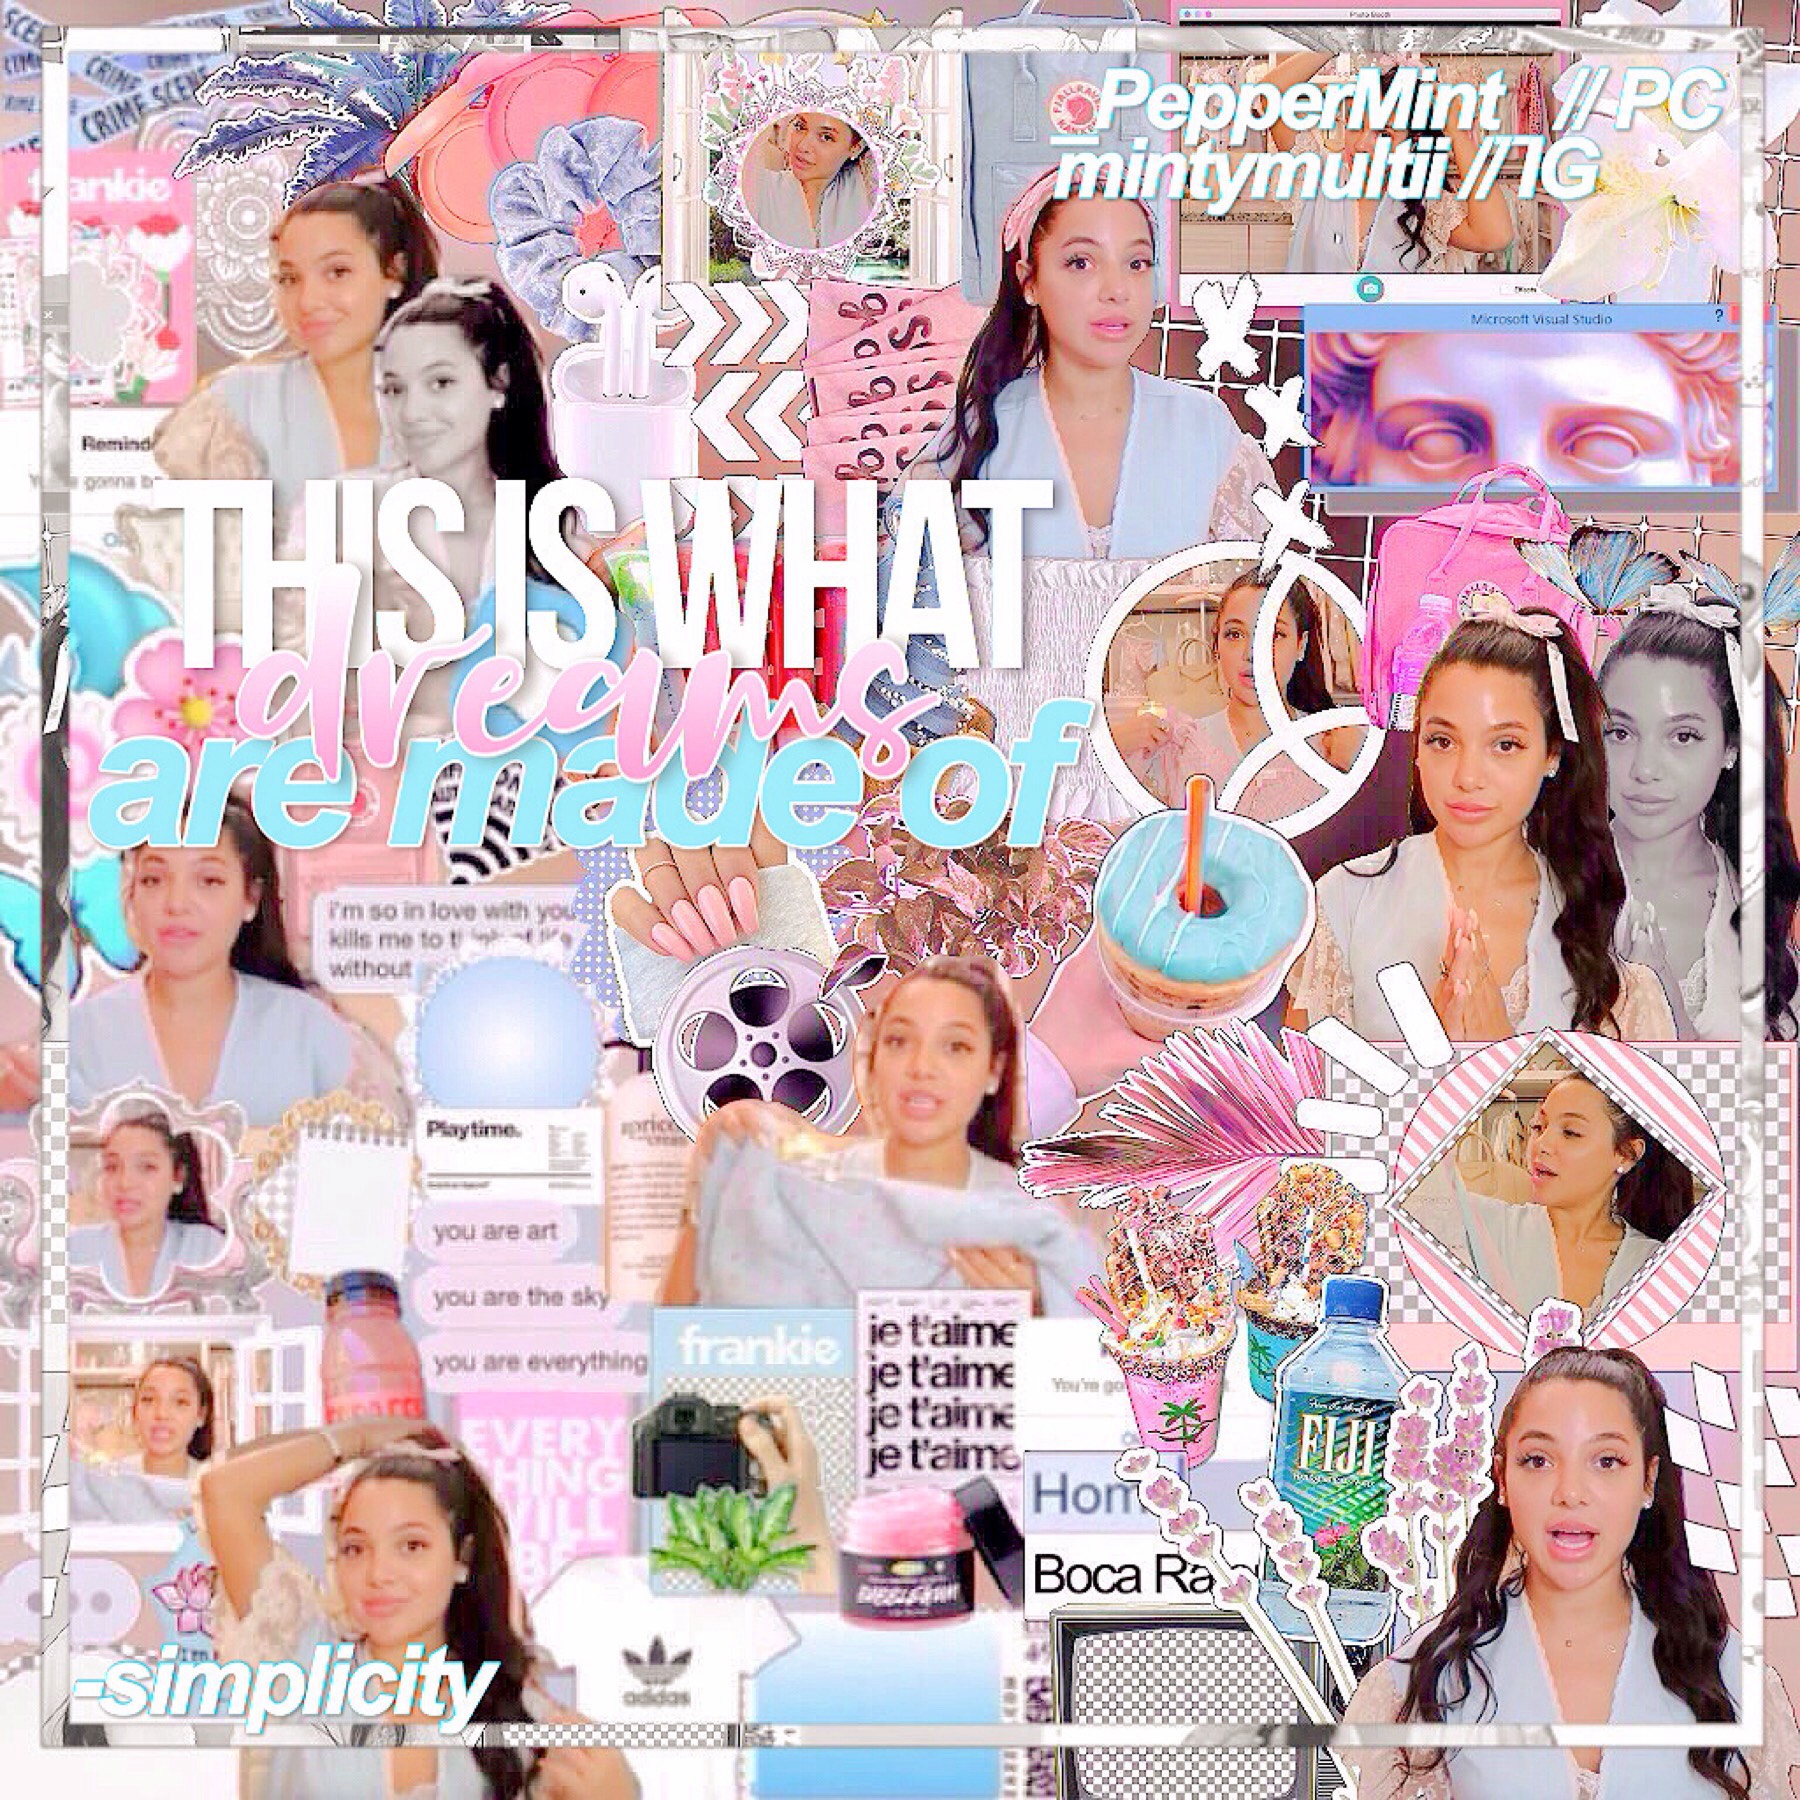 collab w/ the very sweet @-simplicity 💗I think this edit turned out pretty cute (: let me know if ya wanna collab ☺️